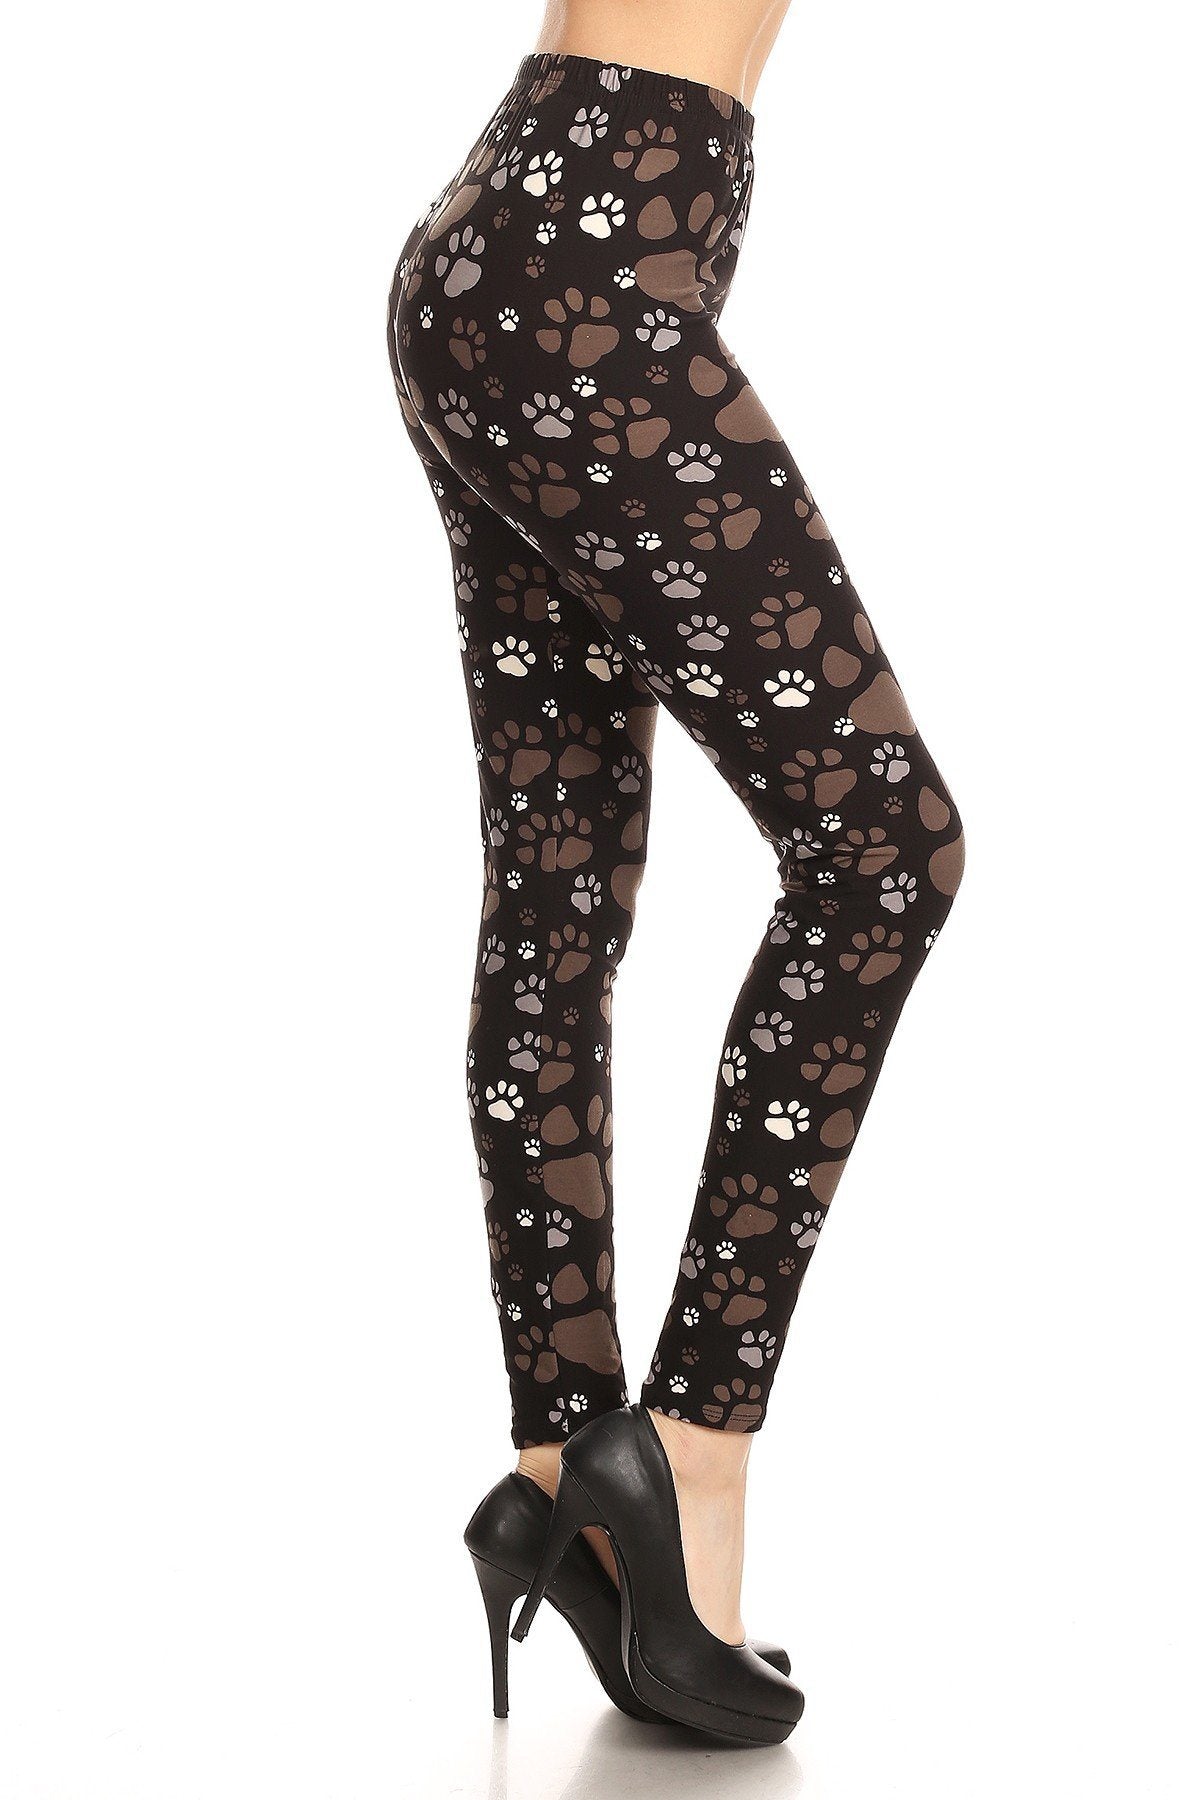 Women's Dog Paw Print Leggings, Black/Brown: OS and Plus Leggings MomMe and More 